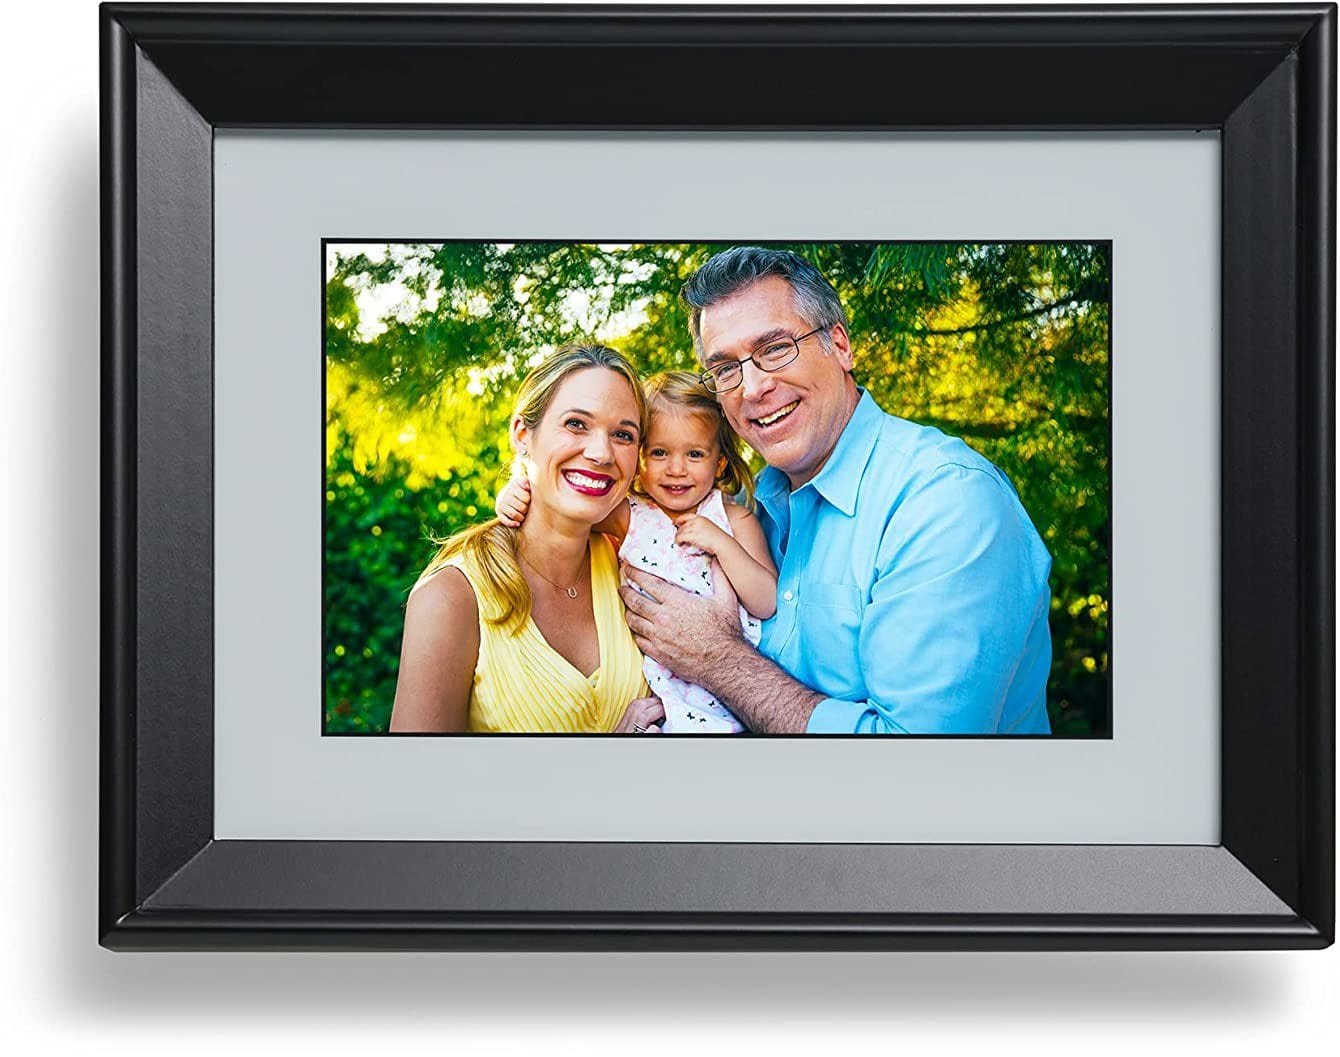 PhotoSpring Portable Picture Frame